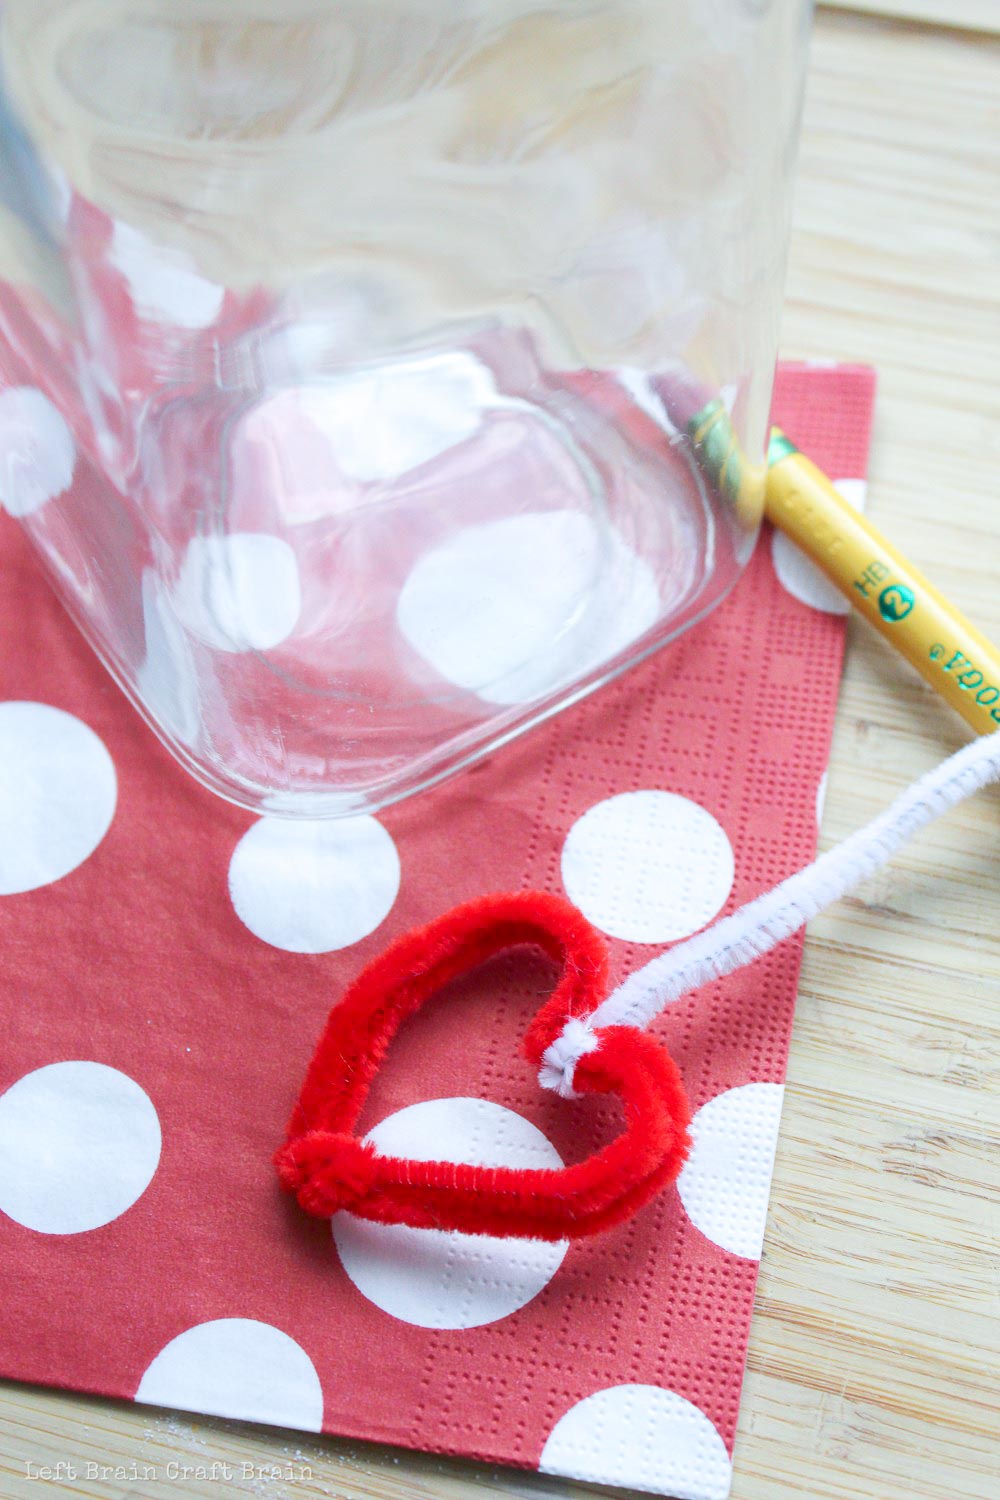 Attach the pipe cleaner heart to a pencil